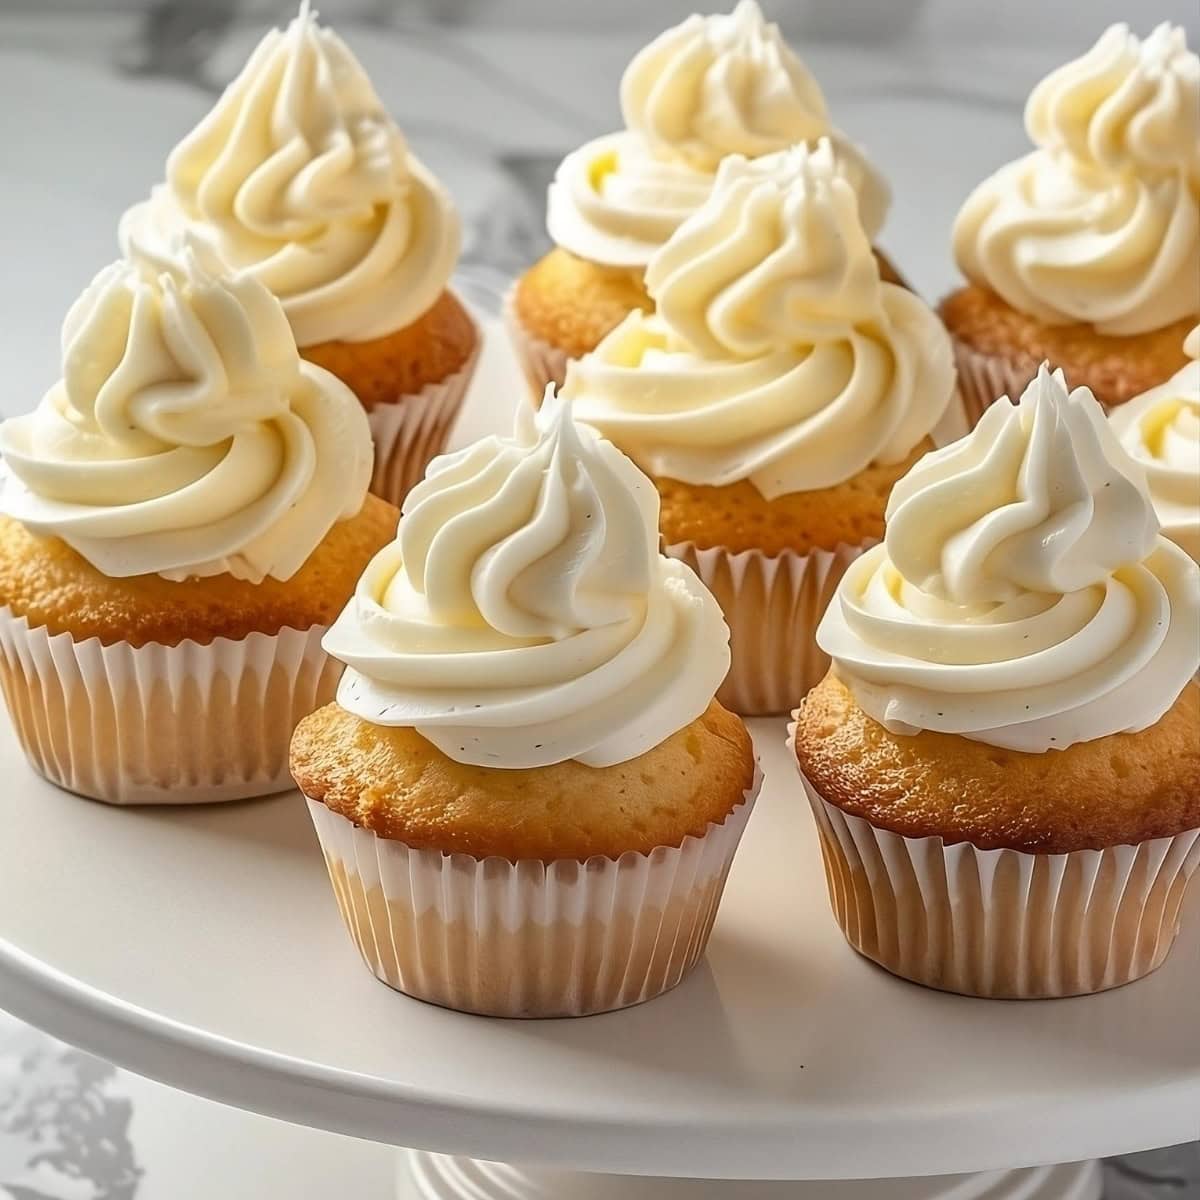 Vanilla cupcakes with buttercream frosting arranged in a cake tray.